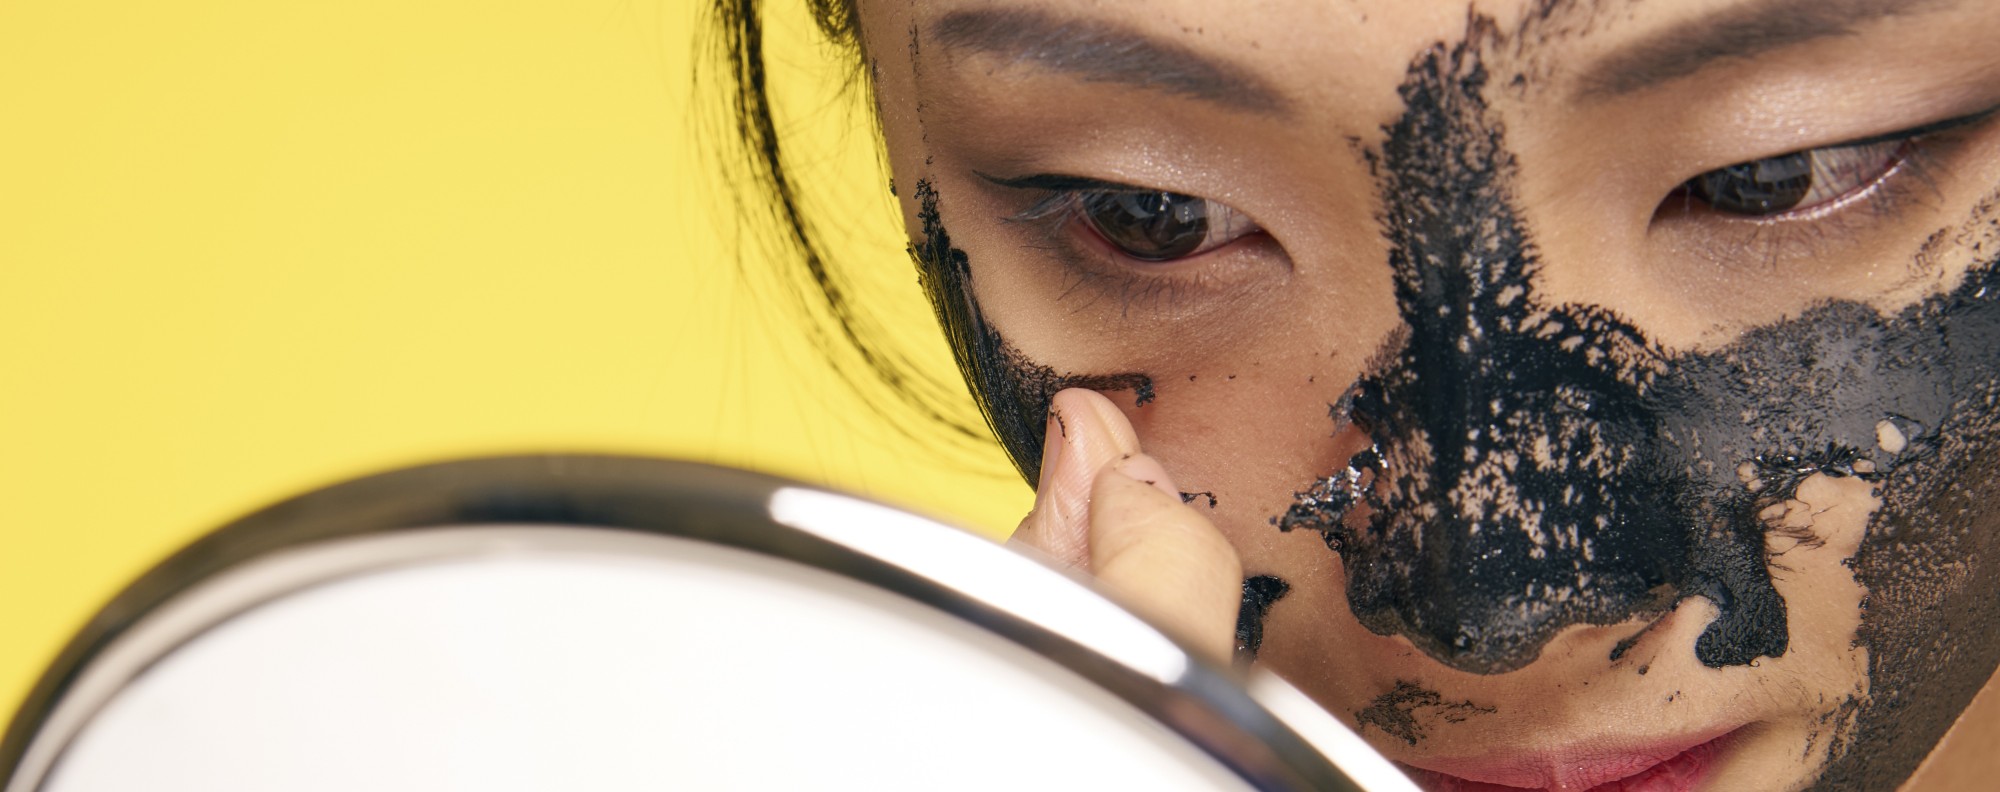 charcoal peel-off masks damage your skin used too often? Here's what an expert has to say | South Morning Post